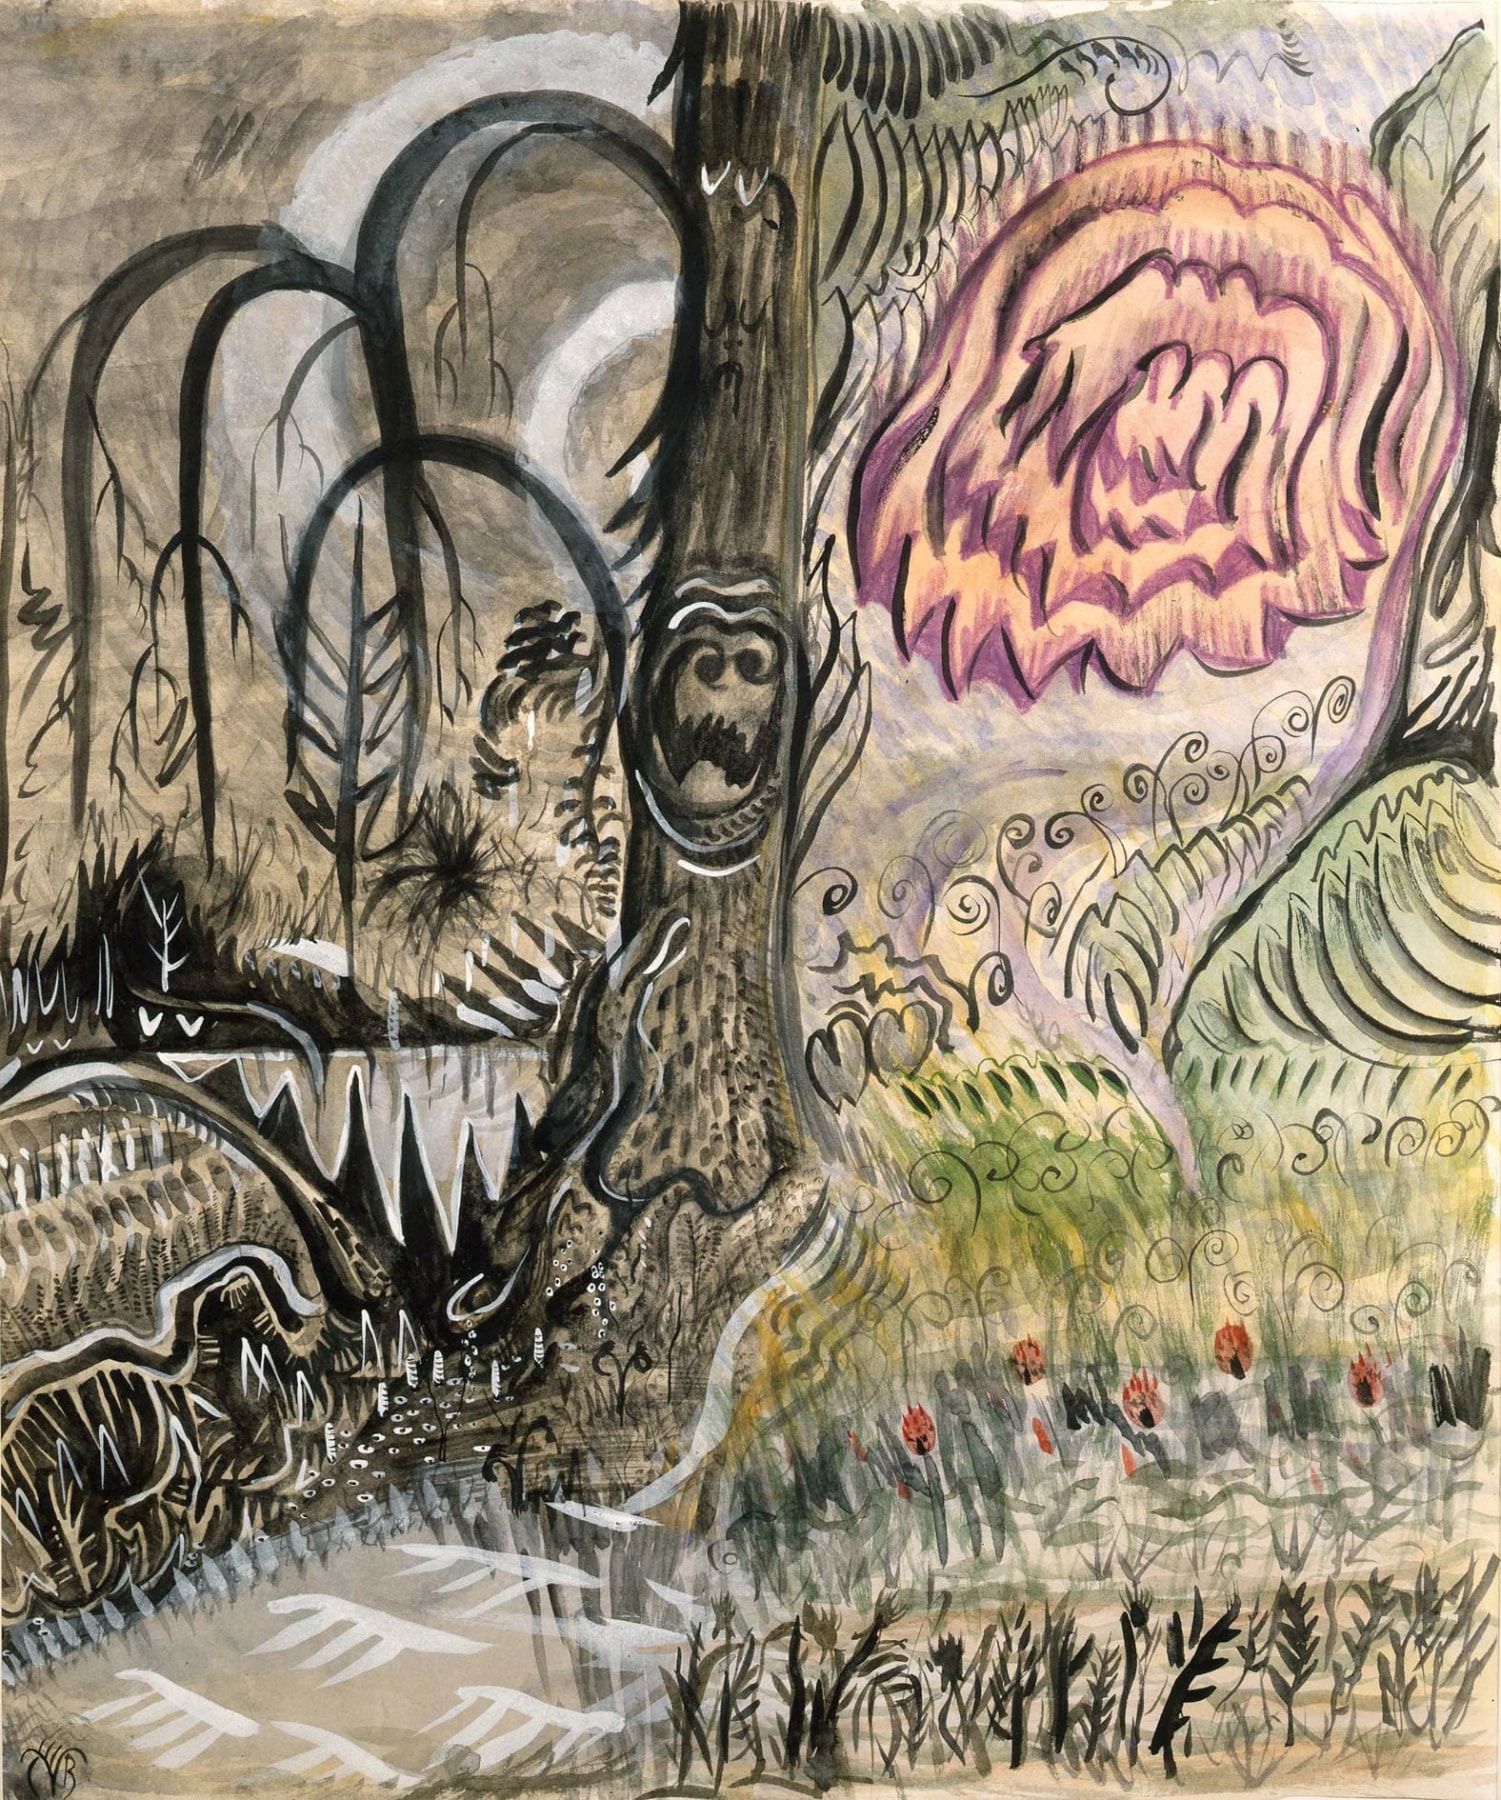 Charles Burchfield, Fantastic Landscape, 1917, watercolor, gouache, pen, black ink, brush, gray wash and purple crayon on paper, 21 x 17 inches